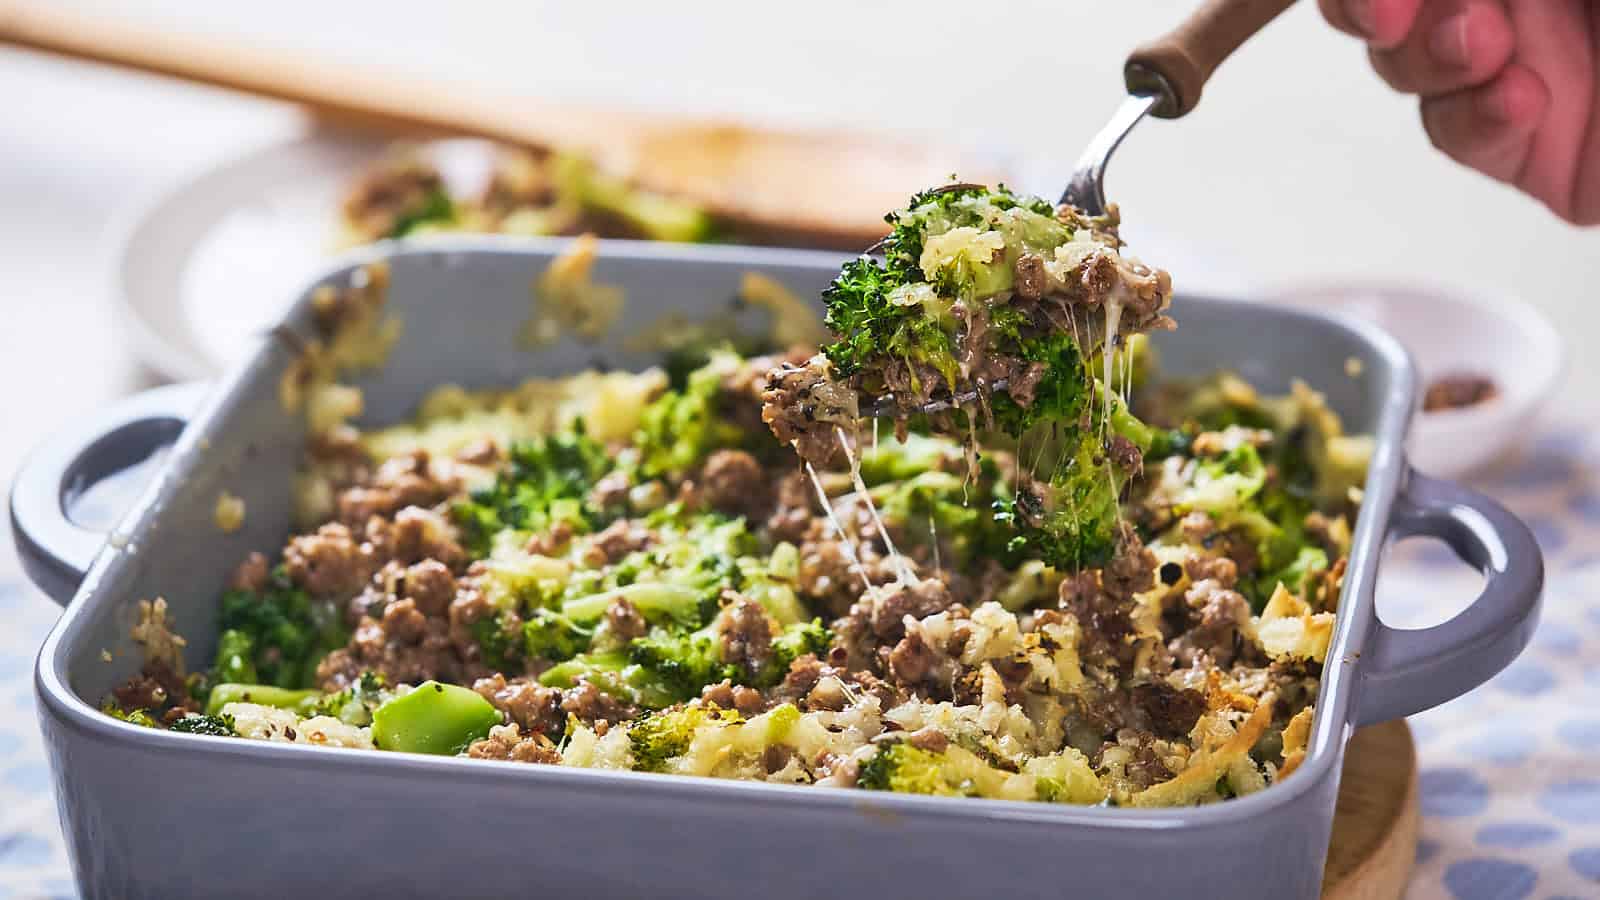 A hand lifts a portion of beef and broccoli casserole from a blue baking dish using a fork, showing melted cheese and visible broccoli and beef chunks.